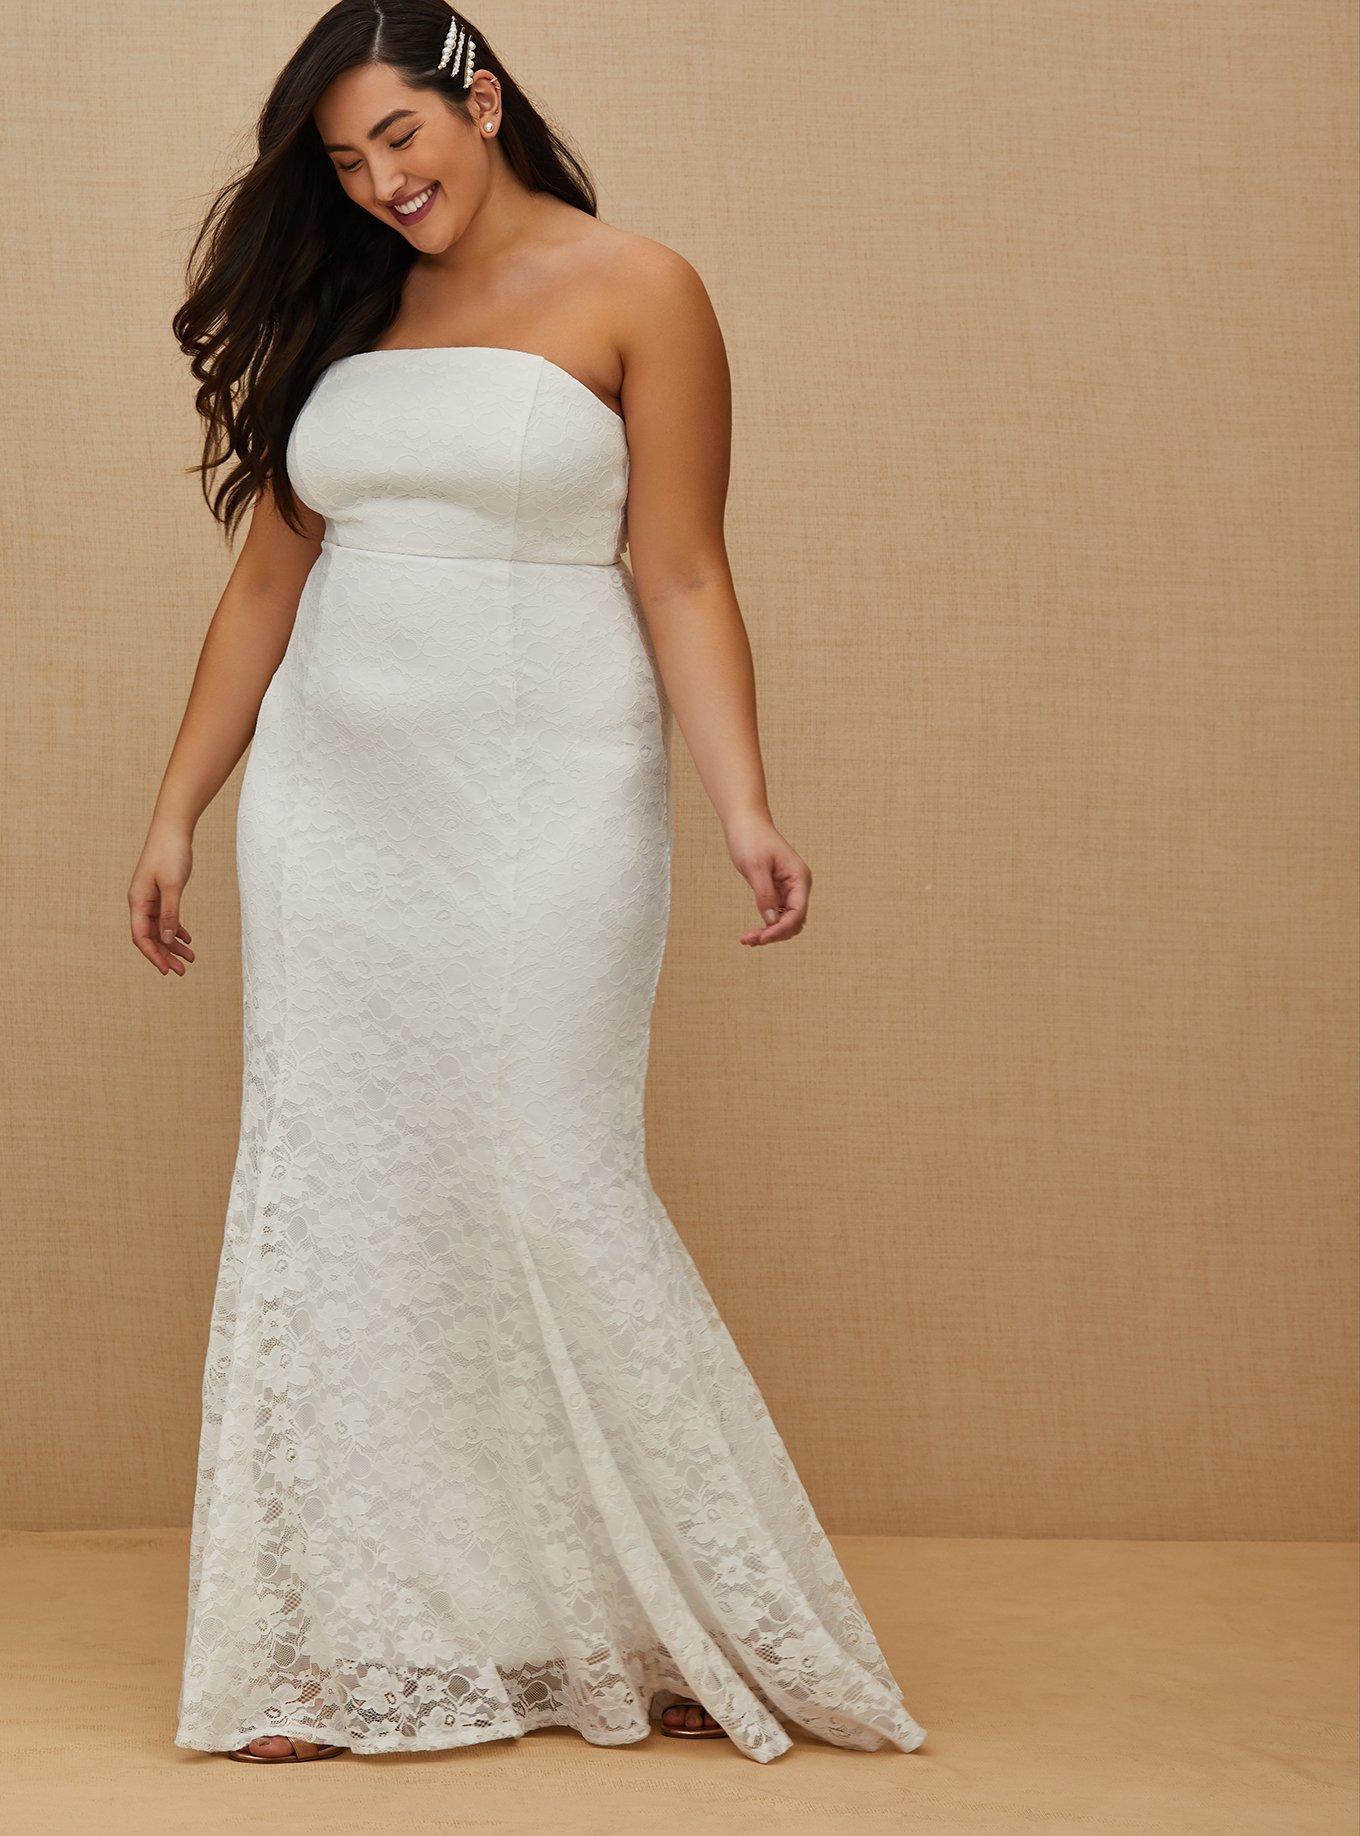 Small Size, Wedding dresses, Size: chest 34 waist 28(adjustable), A-line